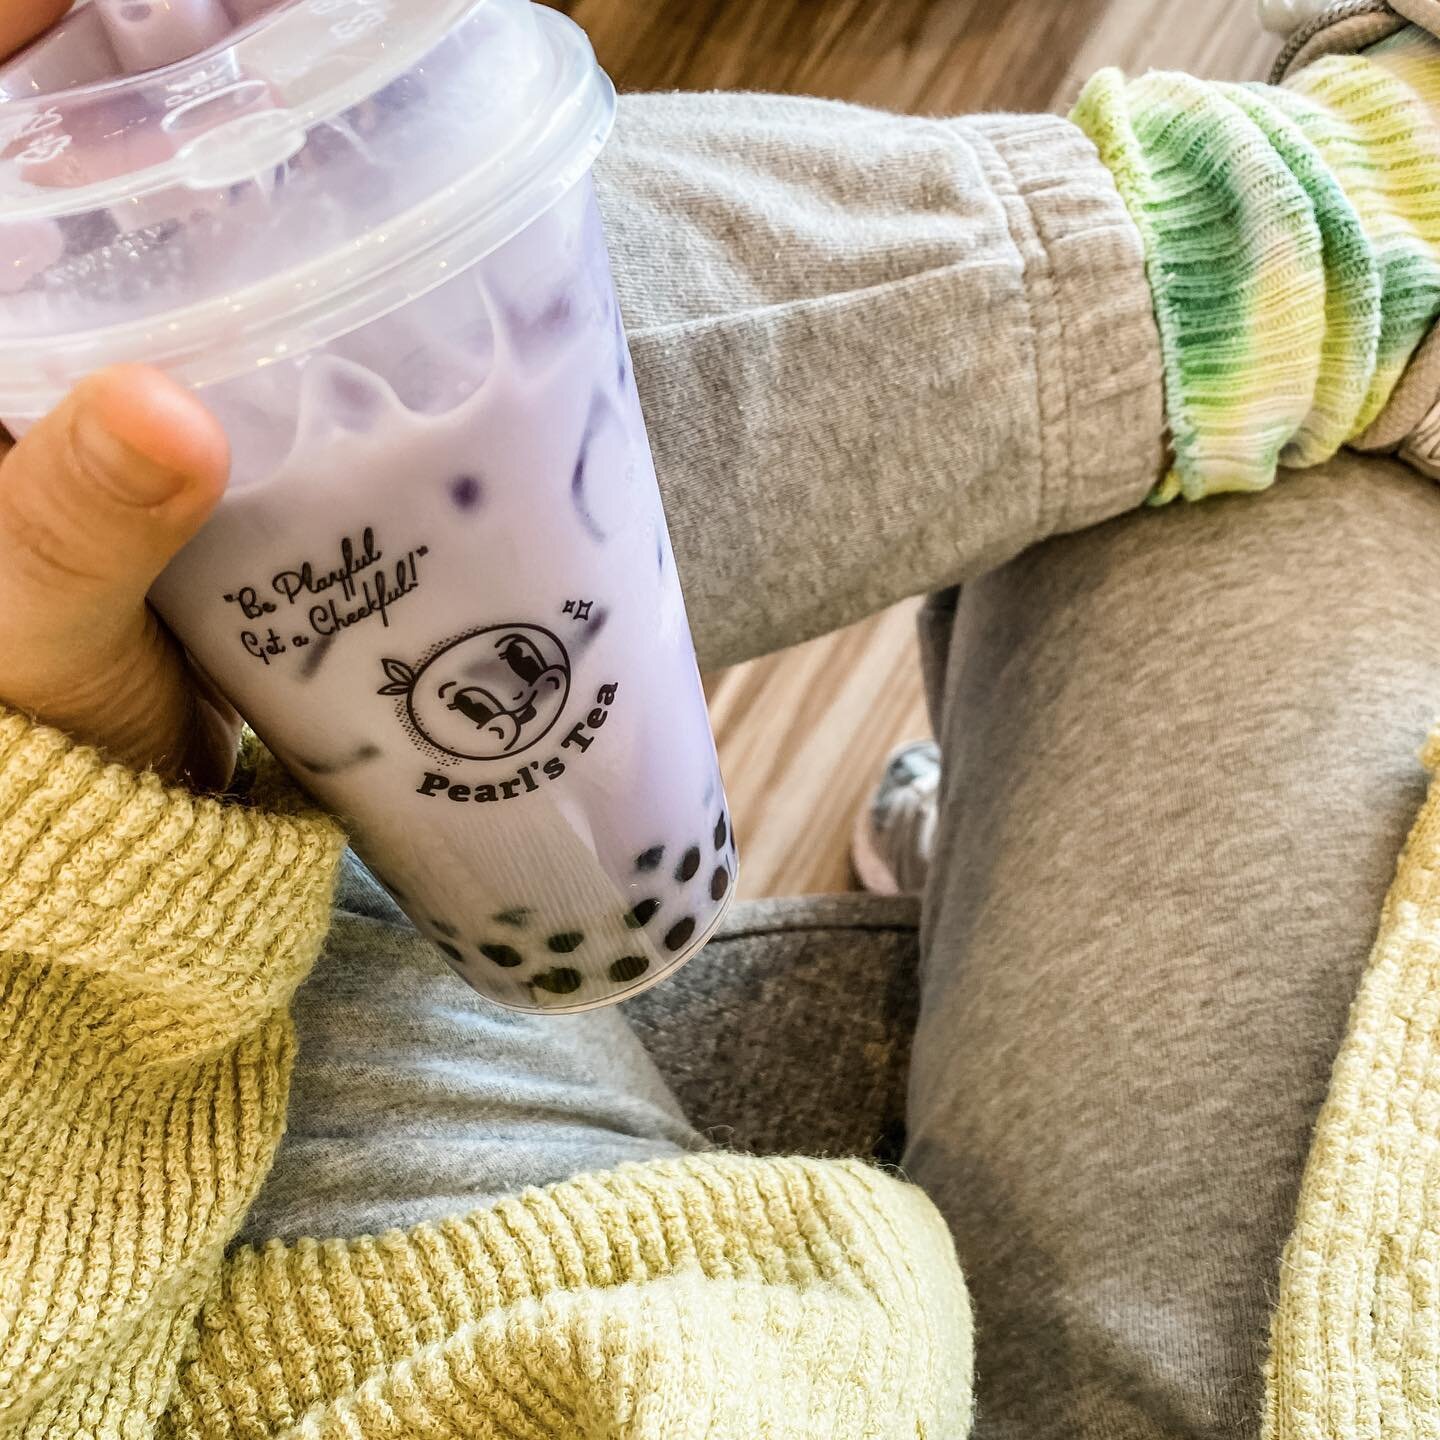 💜✨*TaRo DrOp*!!✨💜 you guys have been asking, and it&rsquo;s finally here! Made with real taro chunks for the perfect creaminess 😚 welcome this beauty to the Pearl&rsquo;s Tea all star lineup of drinks with 10% off any taro beverage all weekend lon